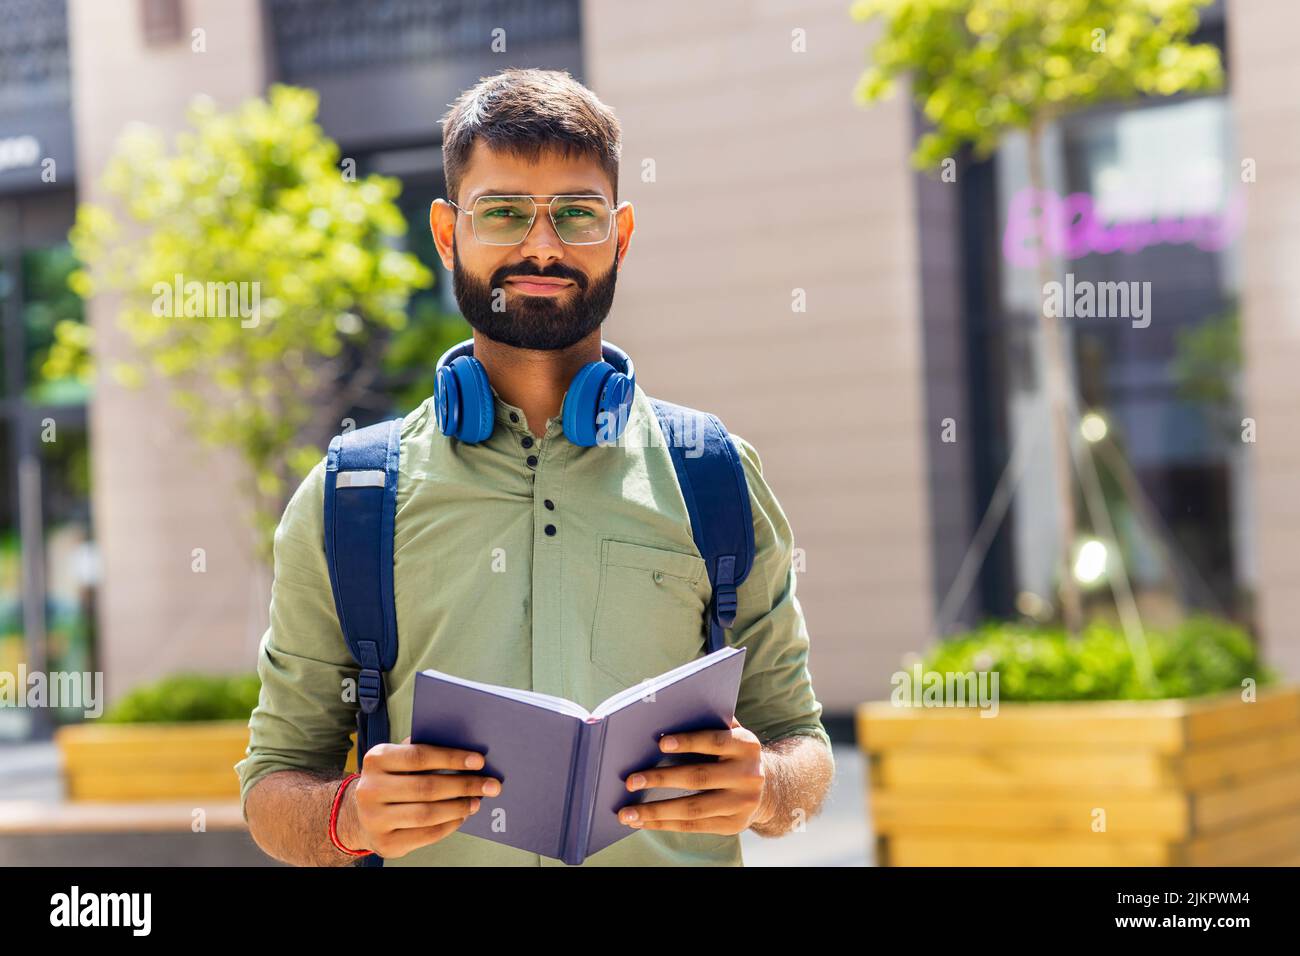 indian student with blue headset and backpack holding books at sunny day Stock Photo